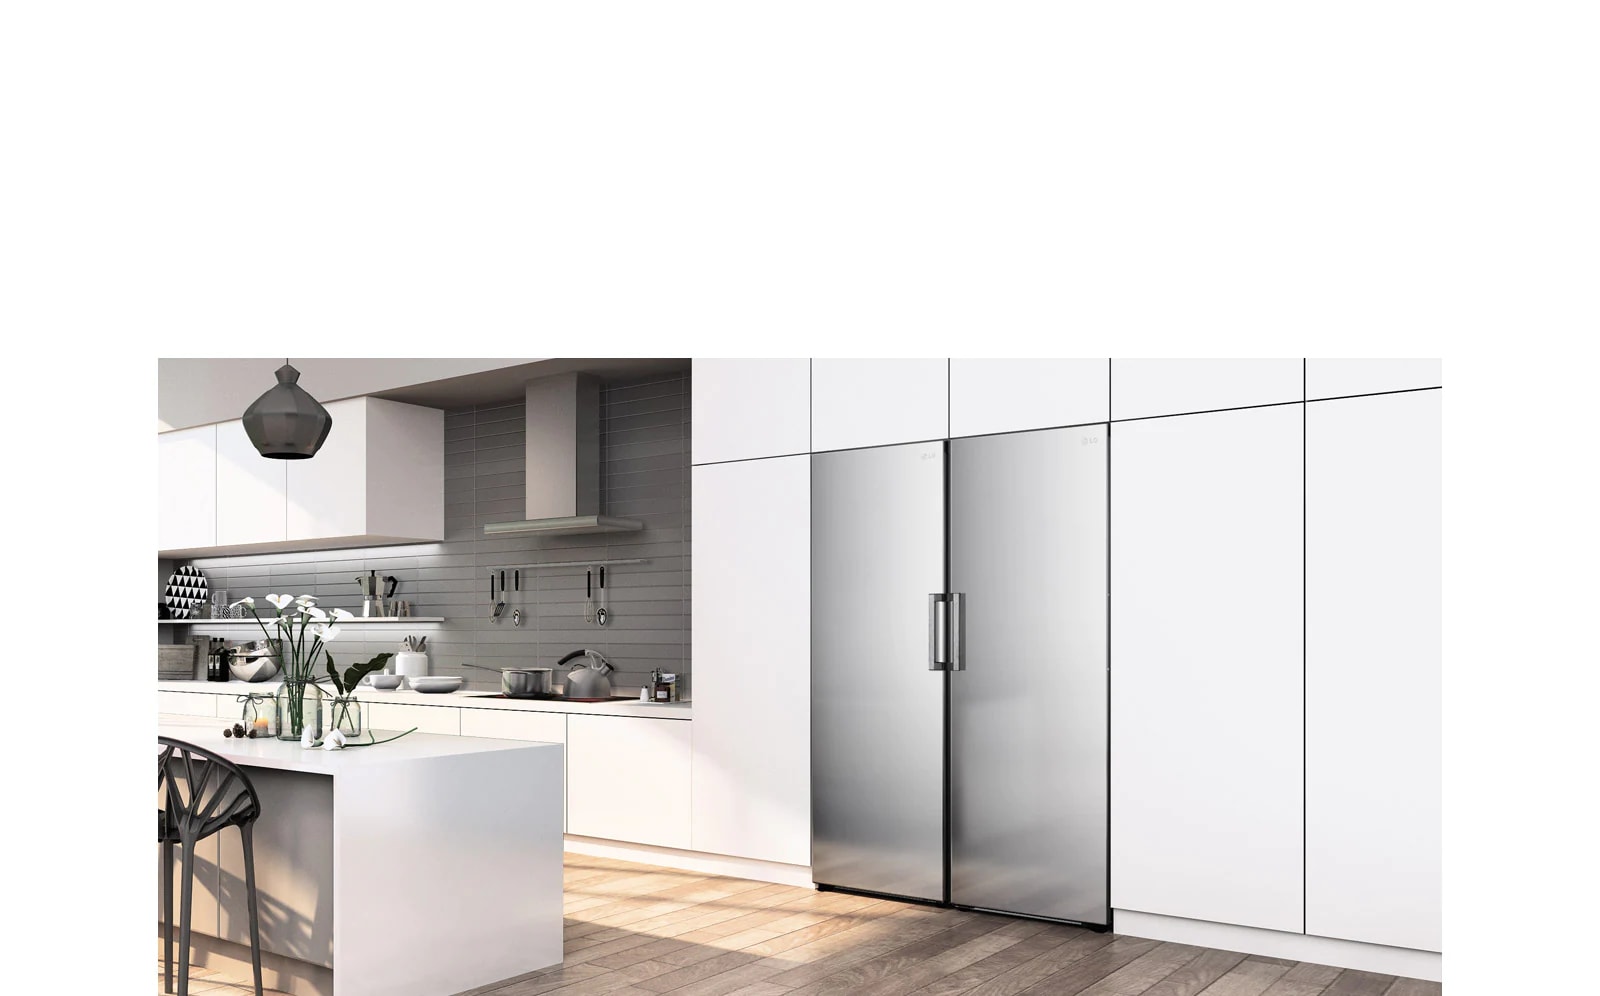 The freezer is shown at an angle seamlessly fitting in with the cabinets in a modern kitchen.